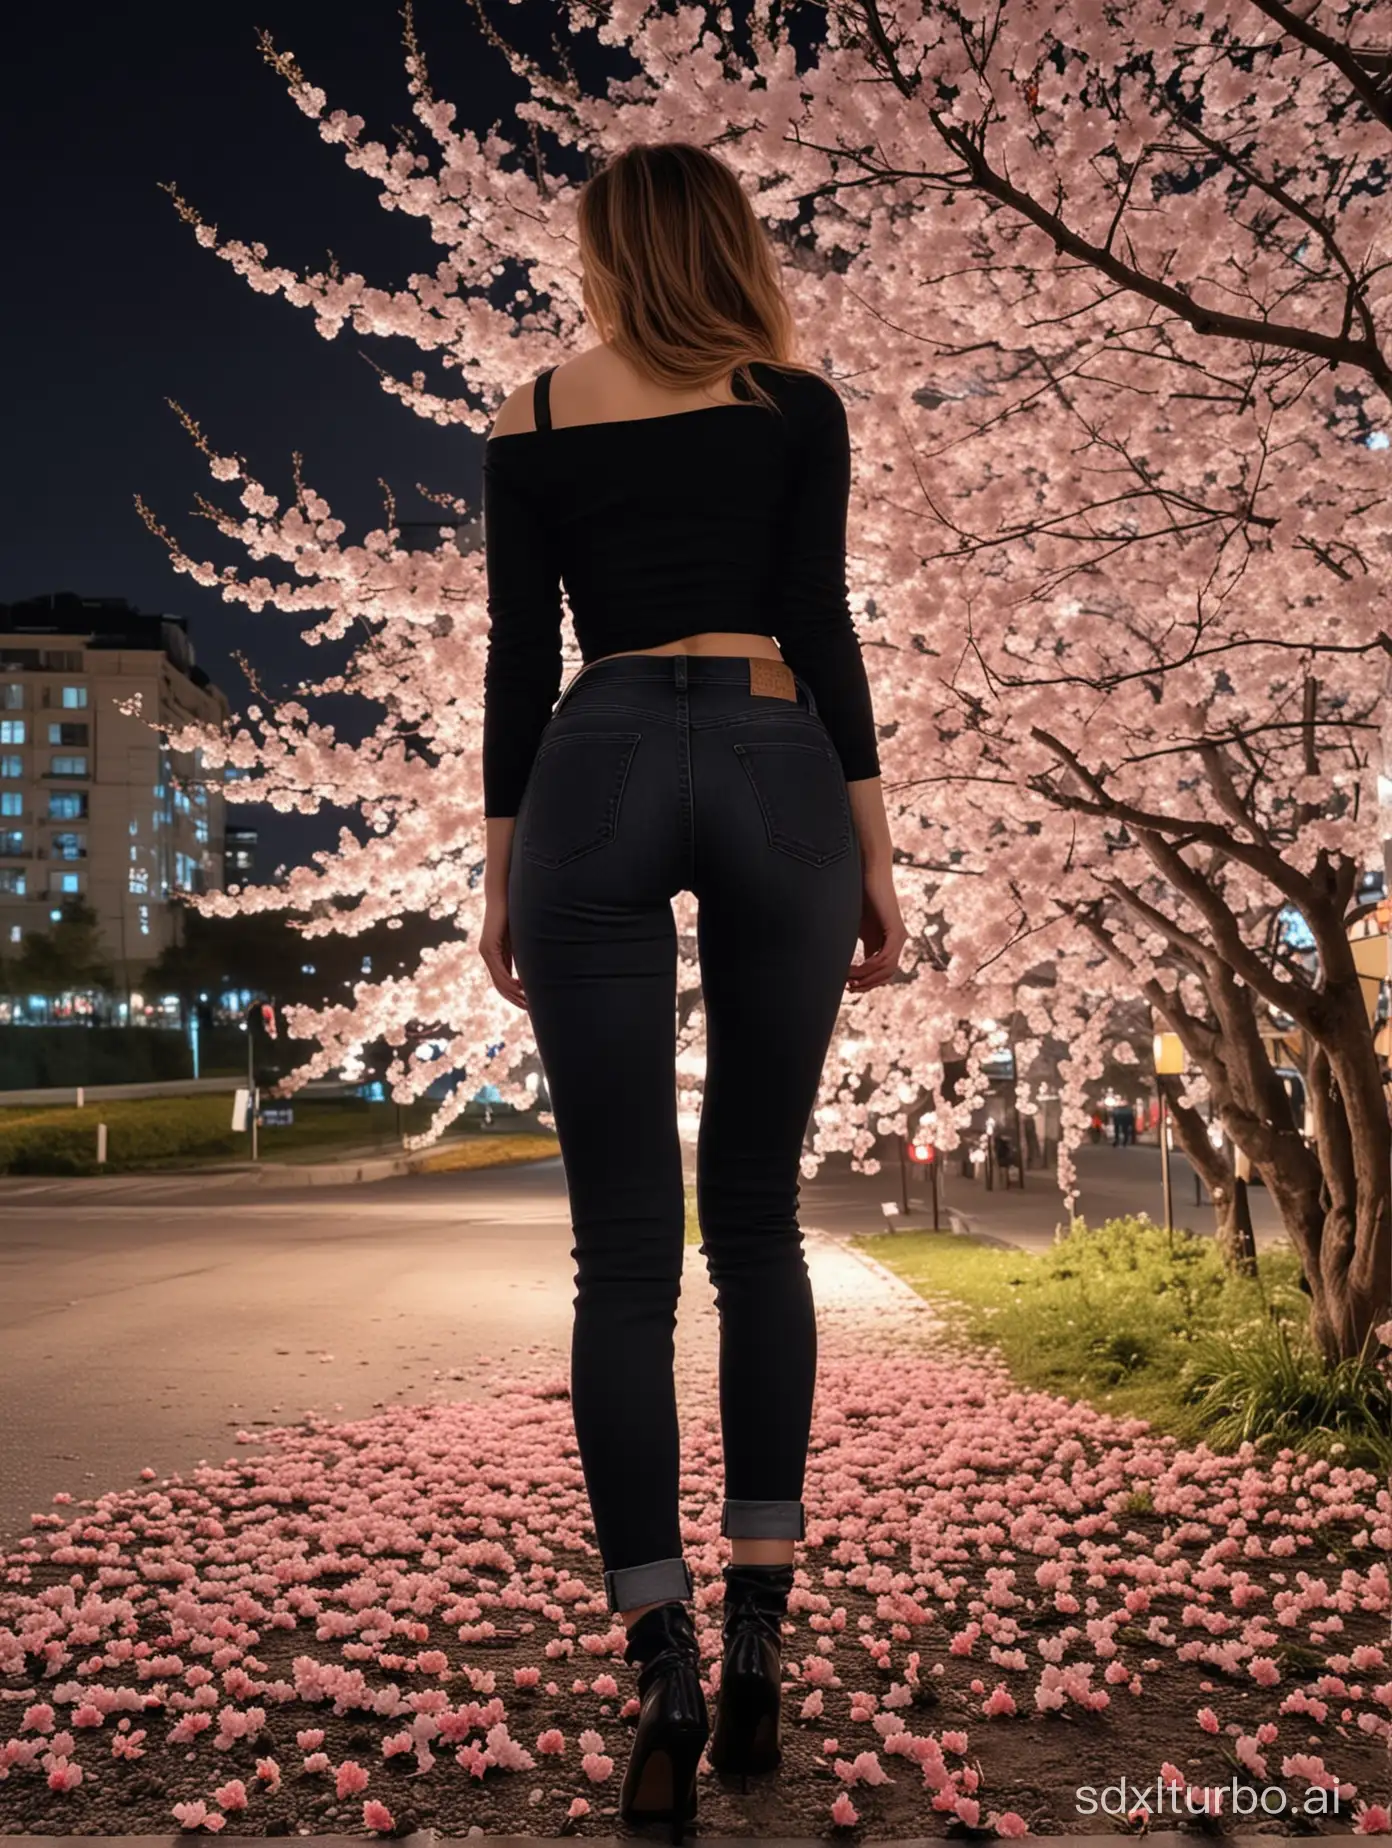 Night-Cherry-Blossoms-Illumination-with-Woman-in-Black-Jeans